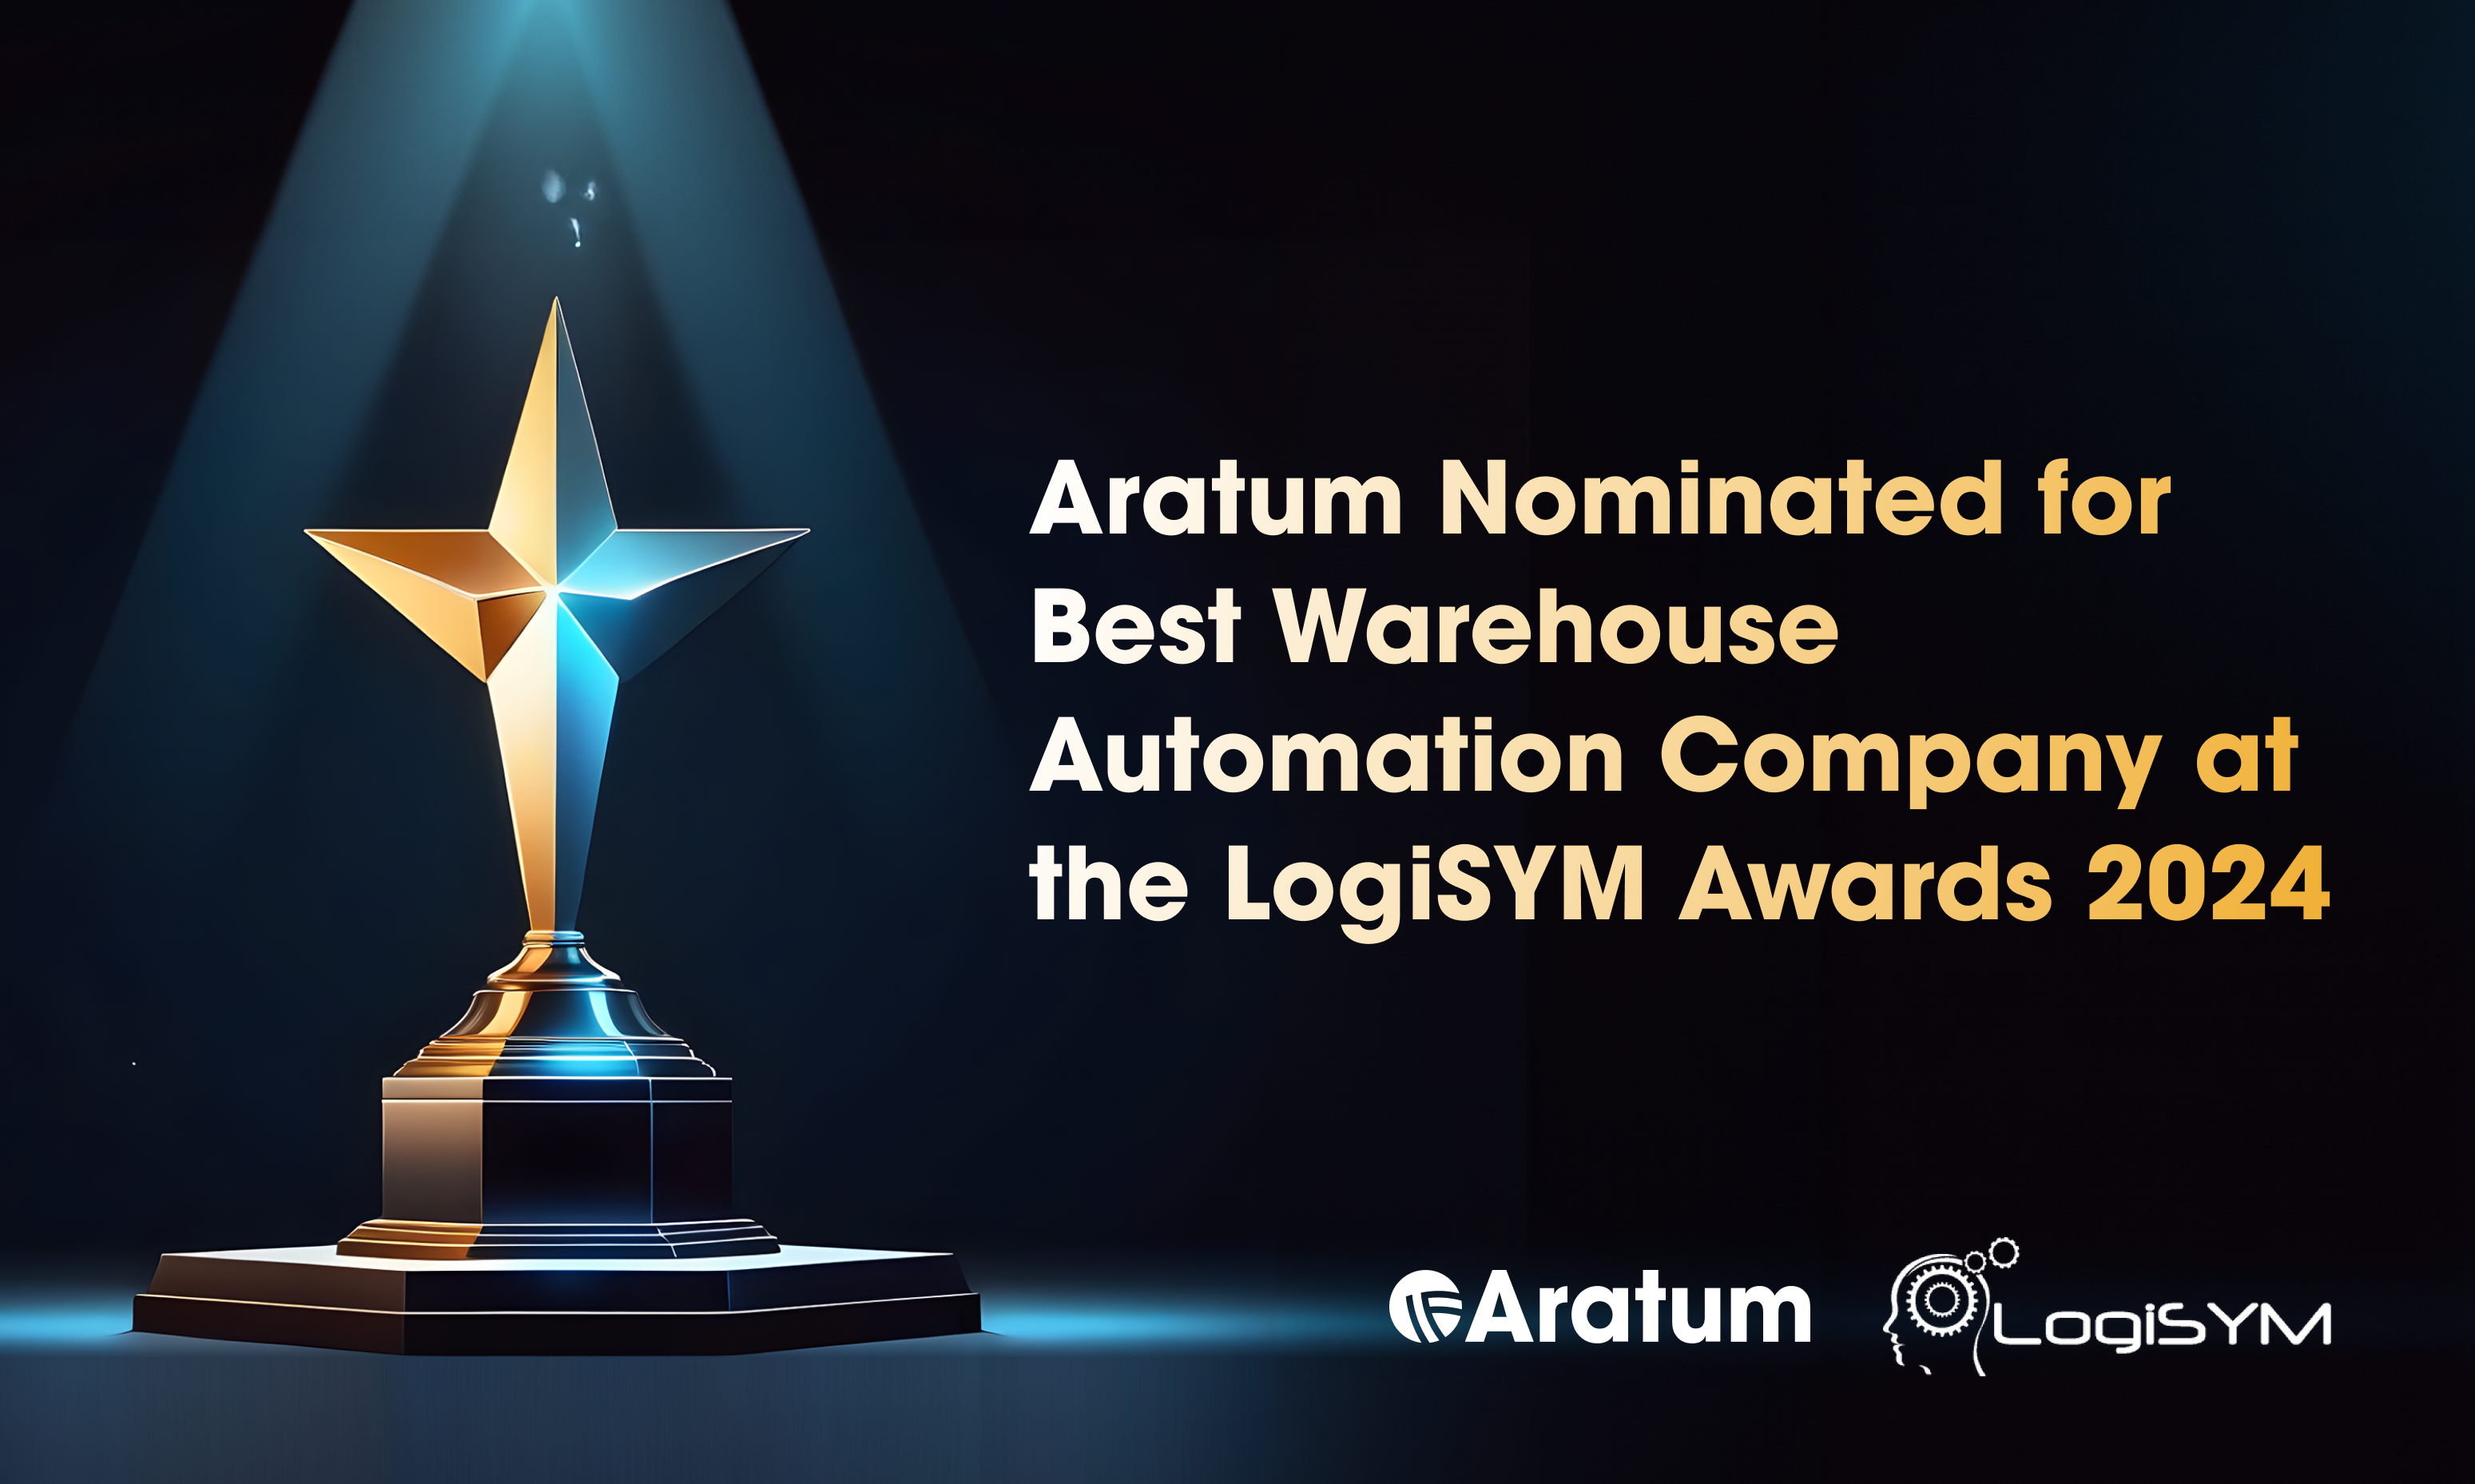 Aratum Nominated for Best Warehouse Automation Company at the LogiSYM Awards 2024